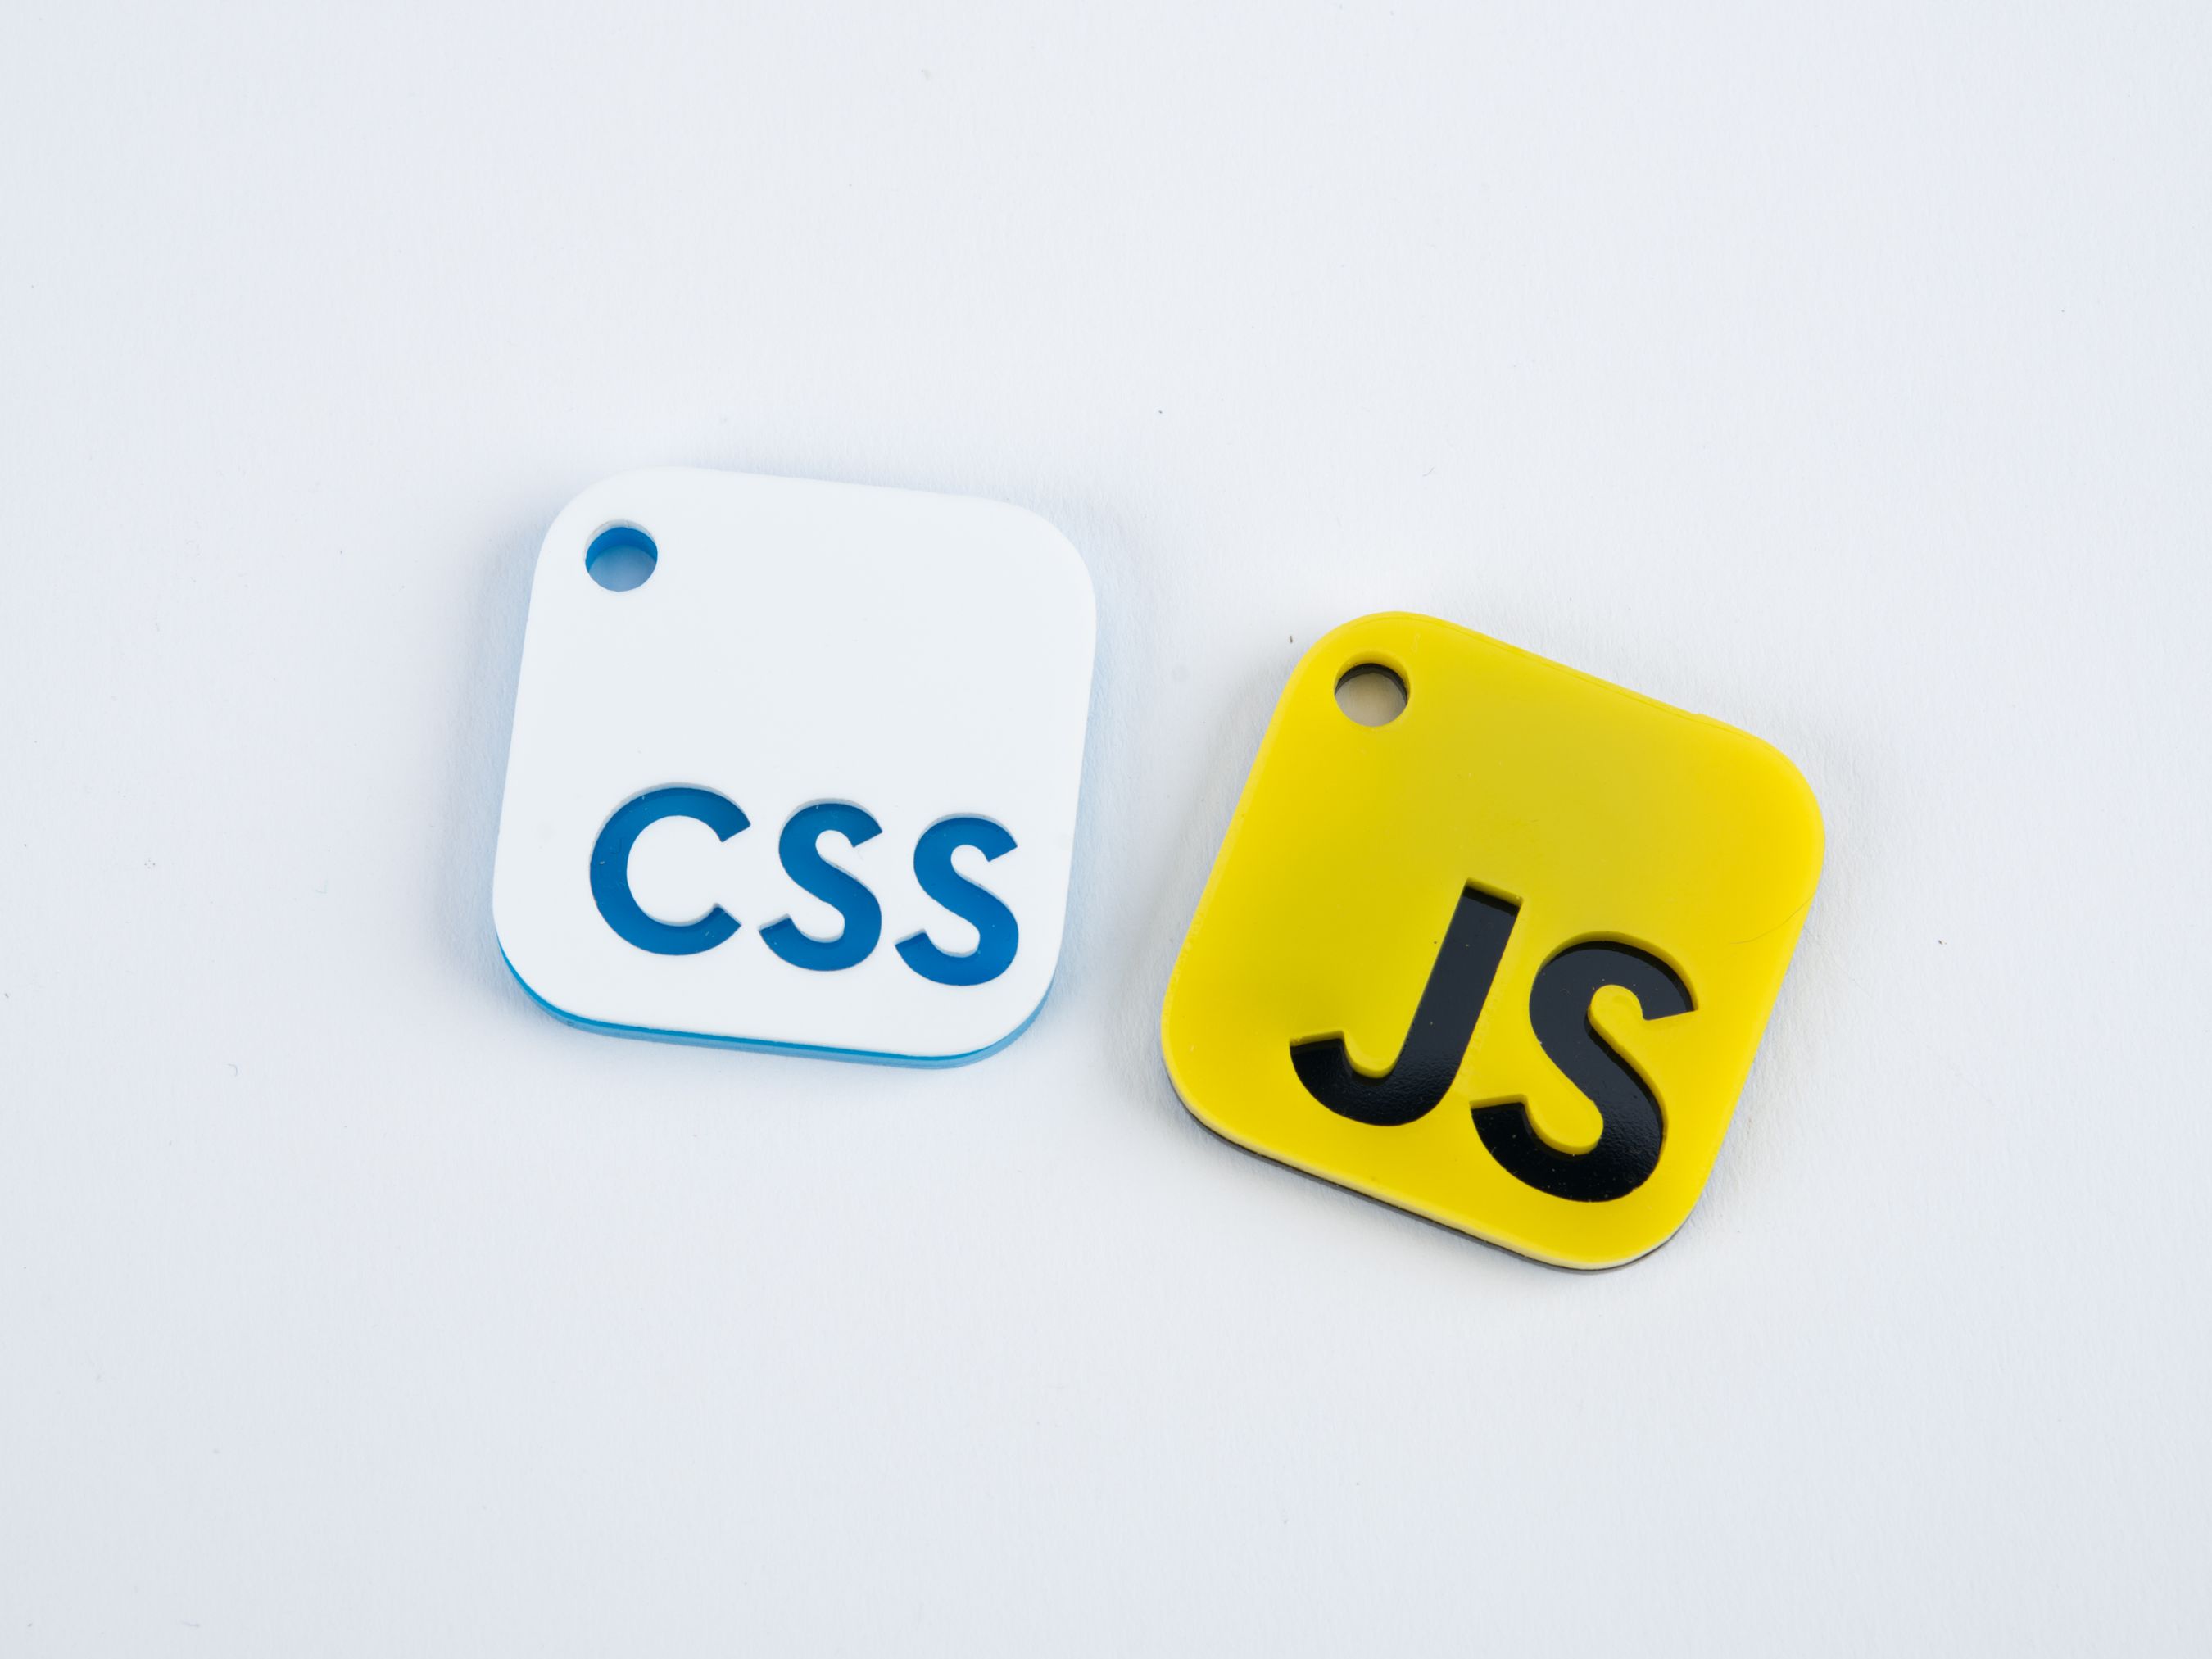 CSS and JS charms